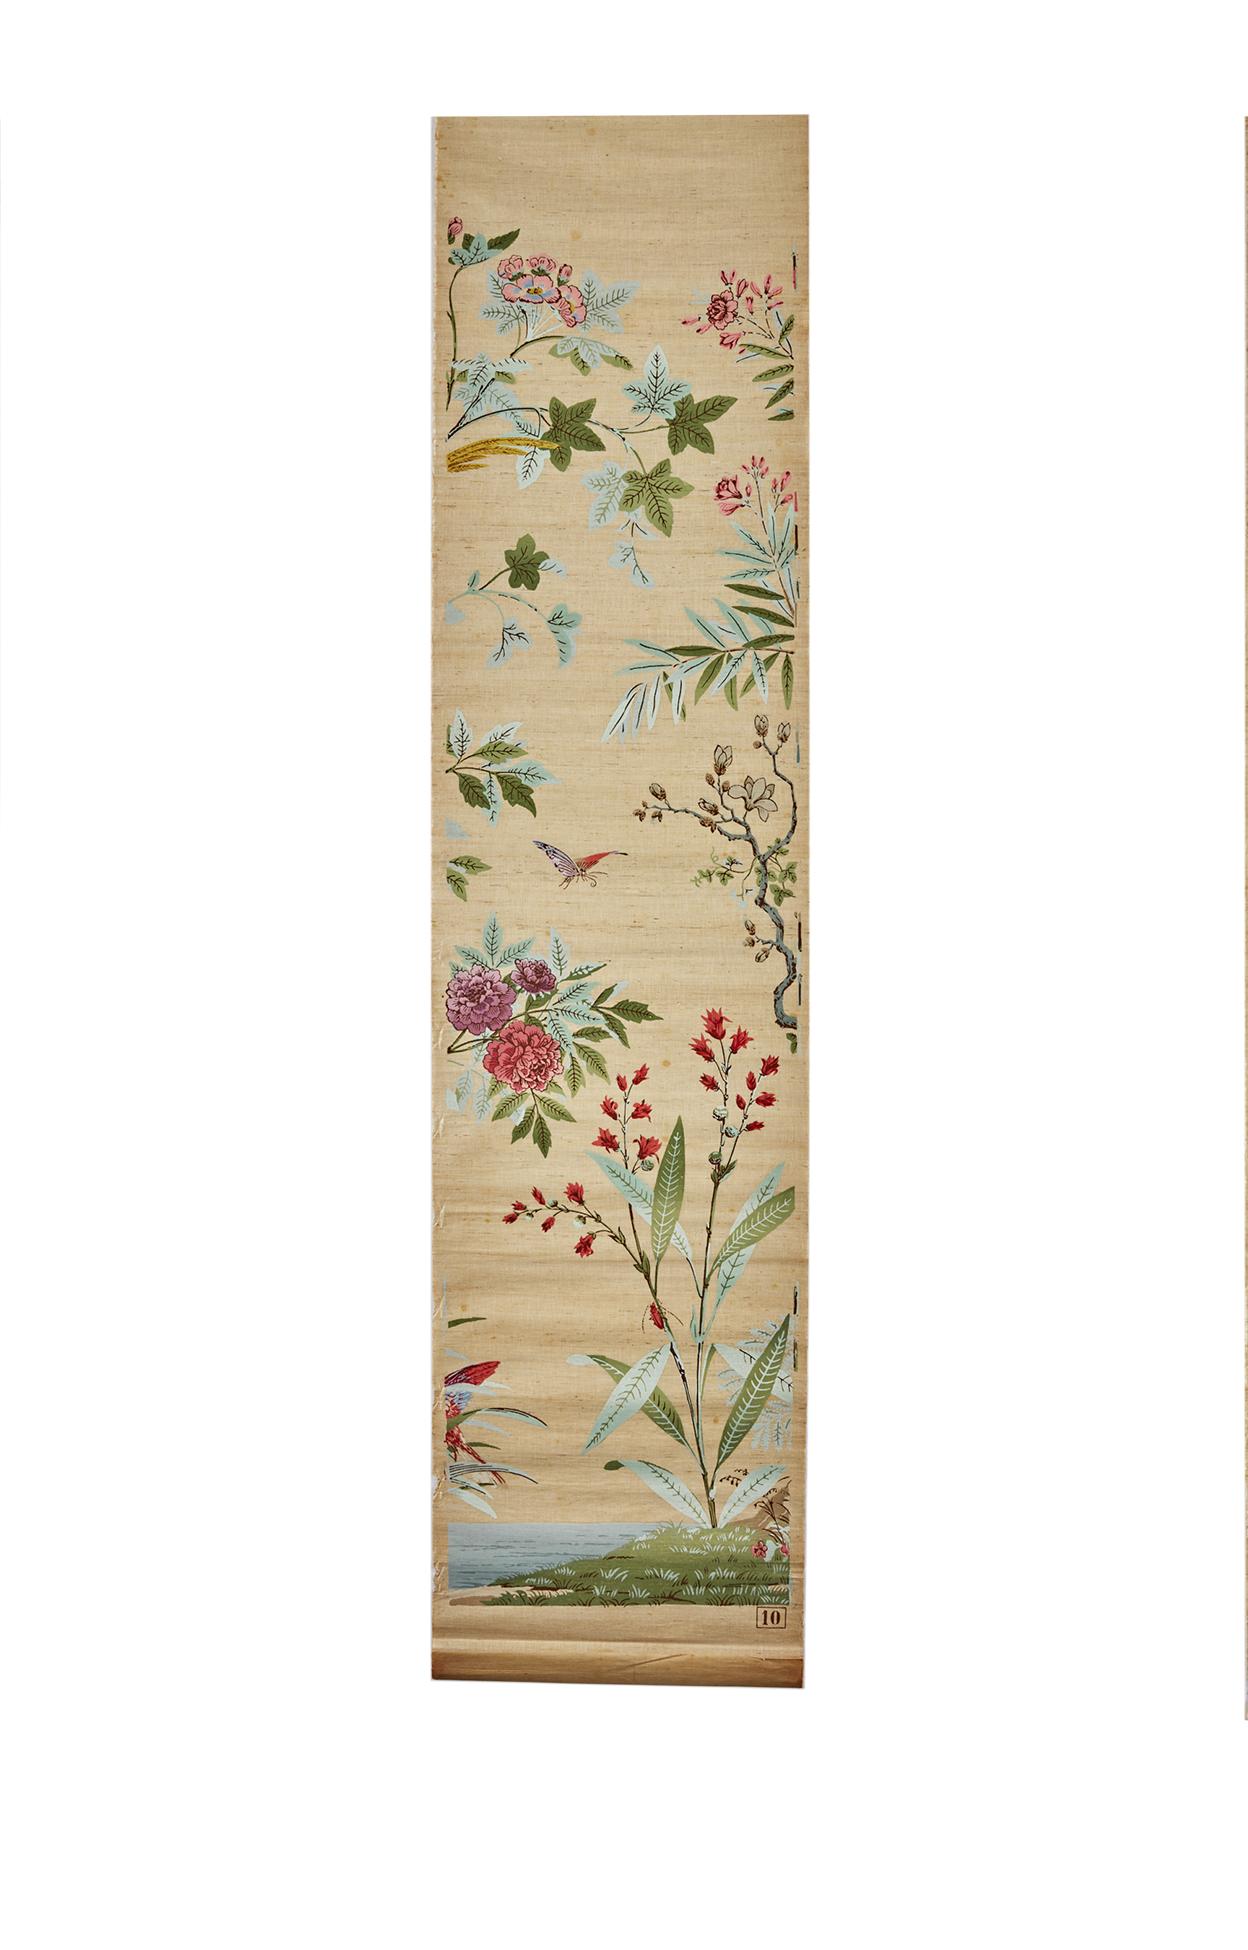 Chinoiserie Zuber, 'Decor Chinois' Hand Wood Blocked on Grasscloth Scenic Wall Paper For Sale